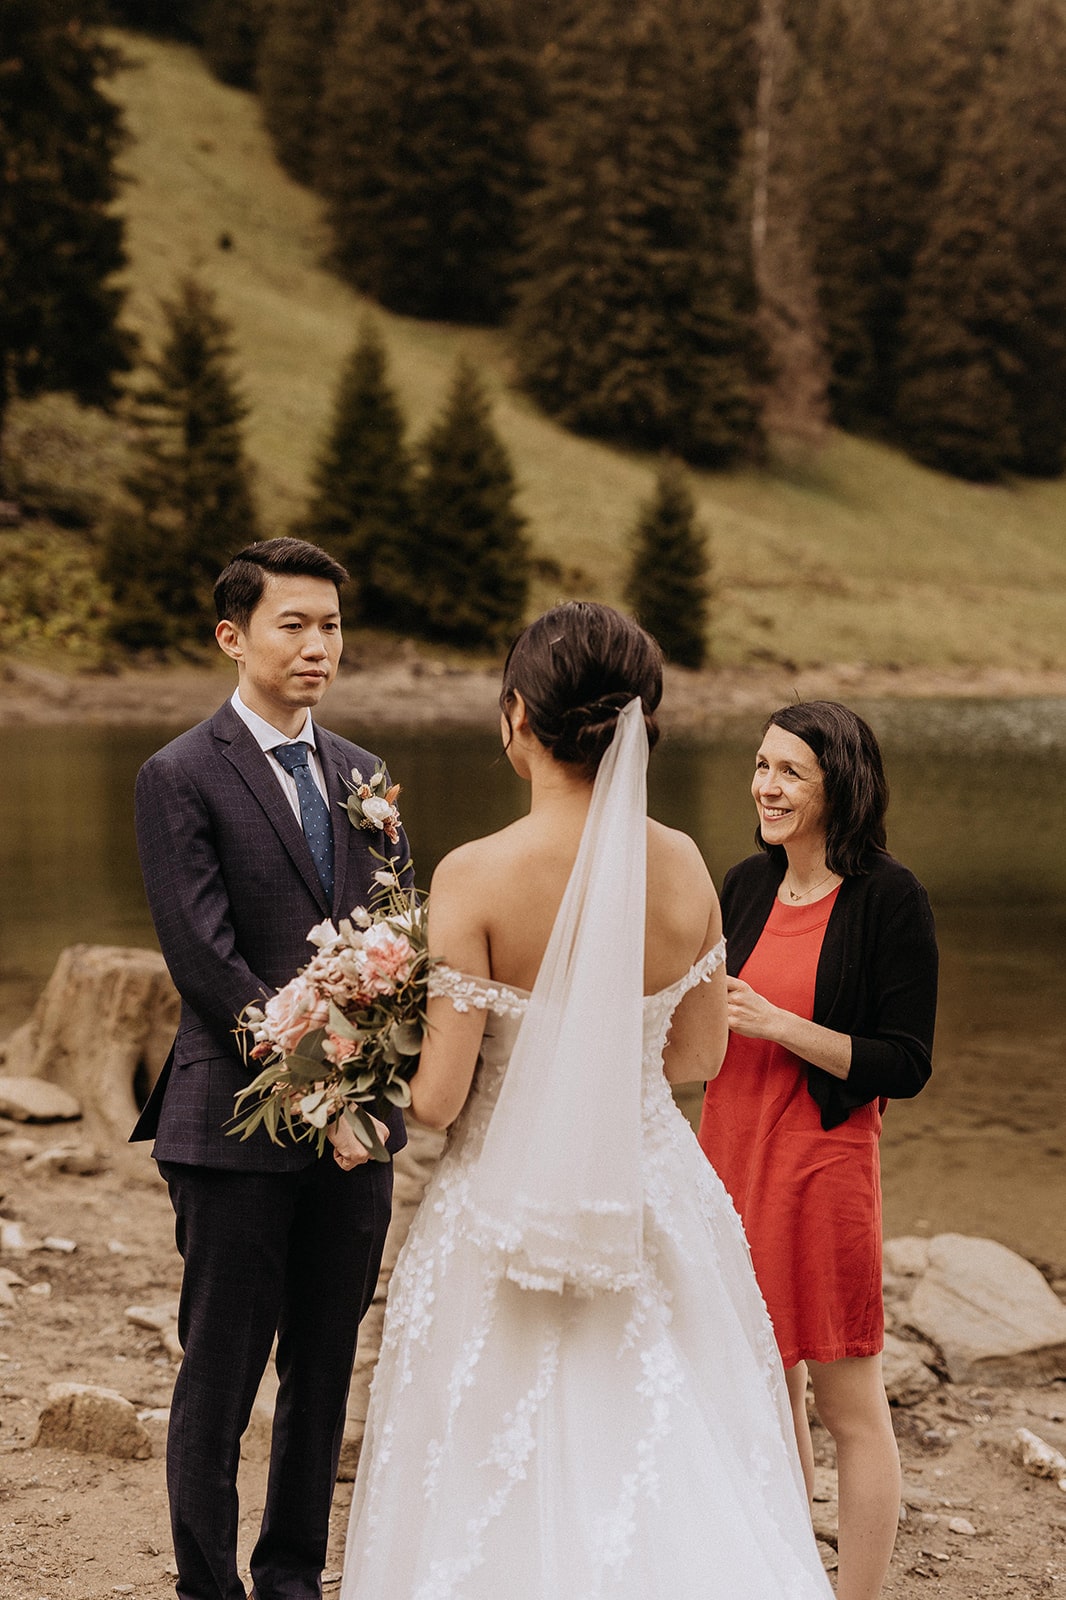 Moving autumn elopement in Gstaad